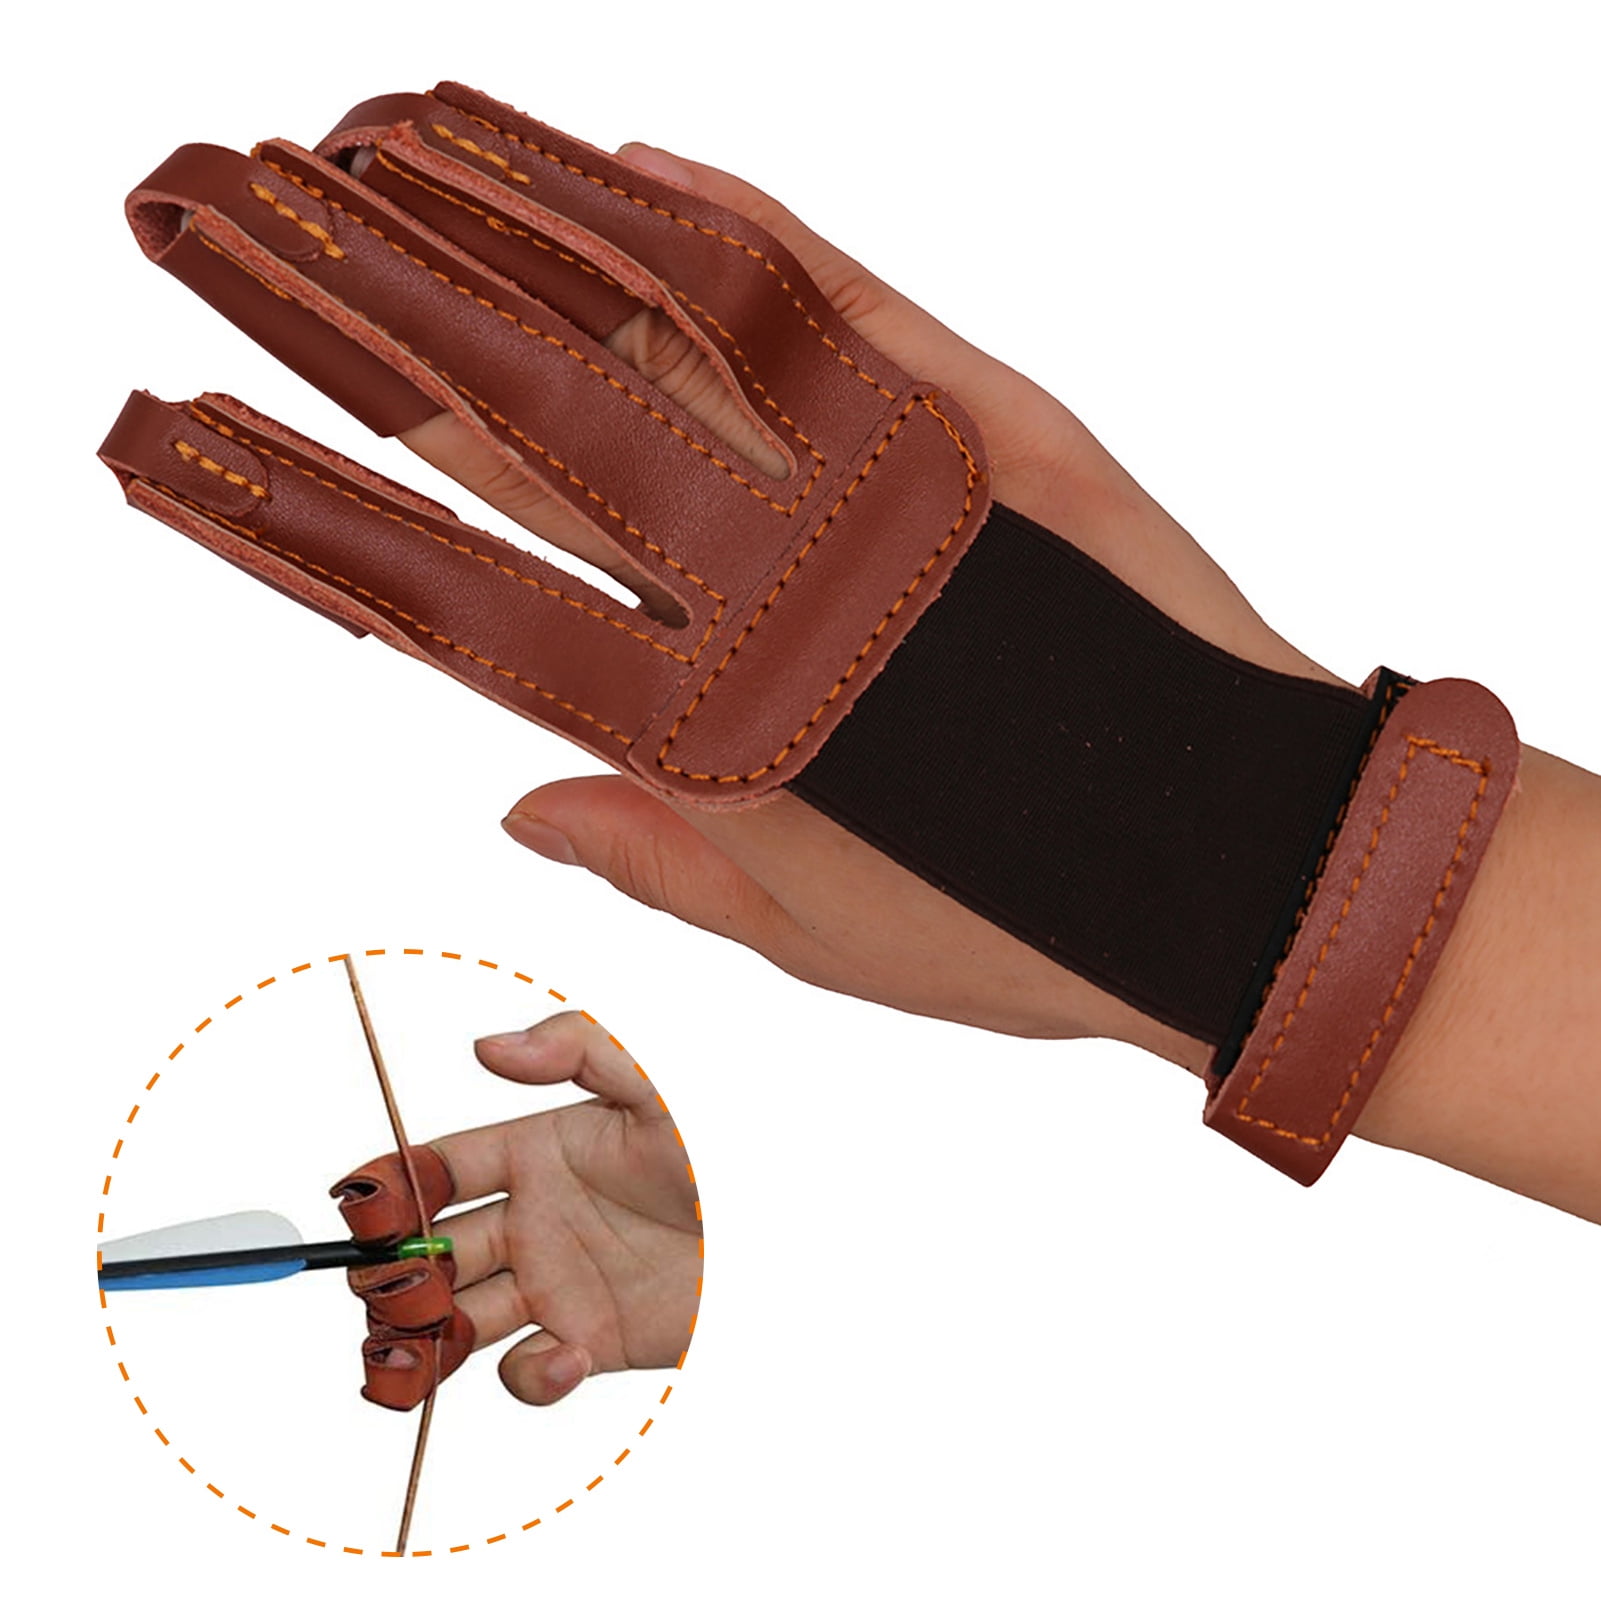 ARCHERS REAL LEATHER SHOOTING 3 FINGERS GLOVE HUNTING SHOOTING ARCHERY GLOVES 